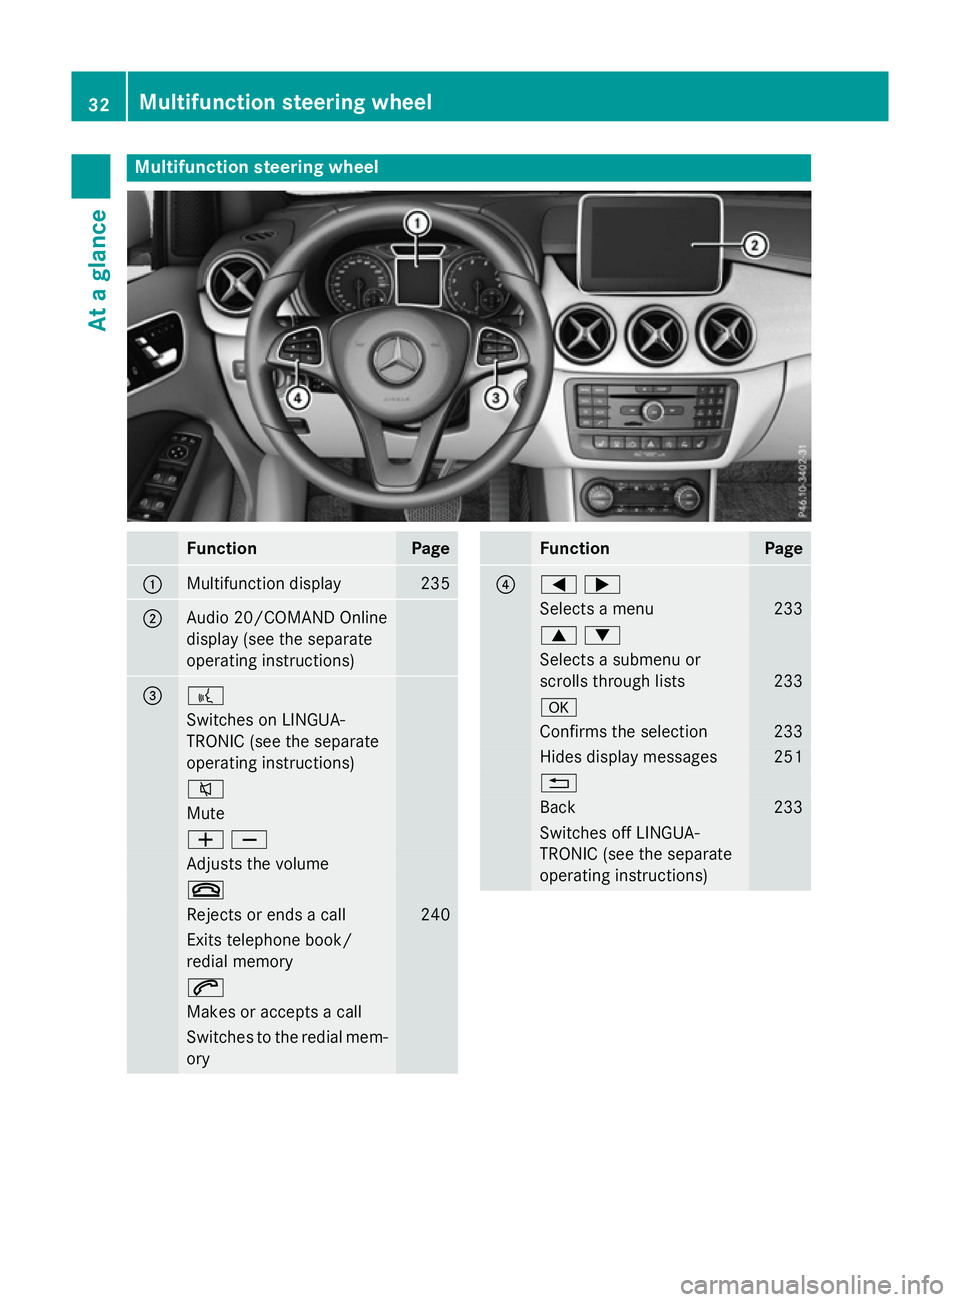 MERCEDES-BENZ B-CLASS HATCHBACK 2014  Owners Manual Multifunction steering wheel
Function Page
:
Multifunction display 235
;
Audio 20/COMAND Online
display (see the separate
operating instructions)
= ?
Switches on LINGUA-
TRONIC (see the separate
opera